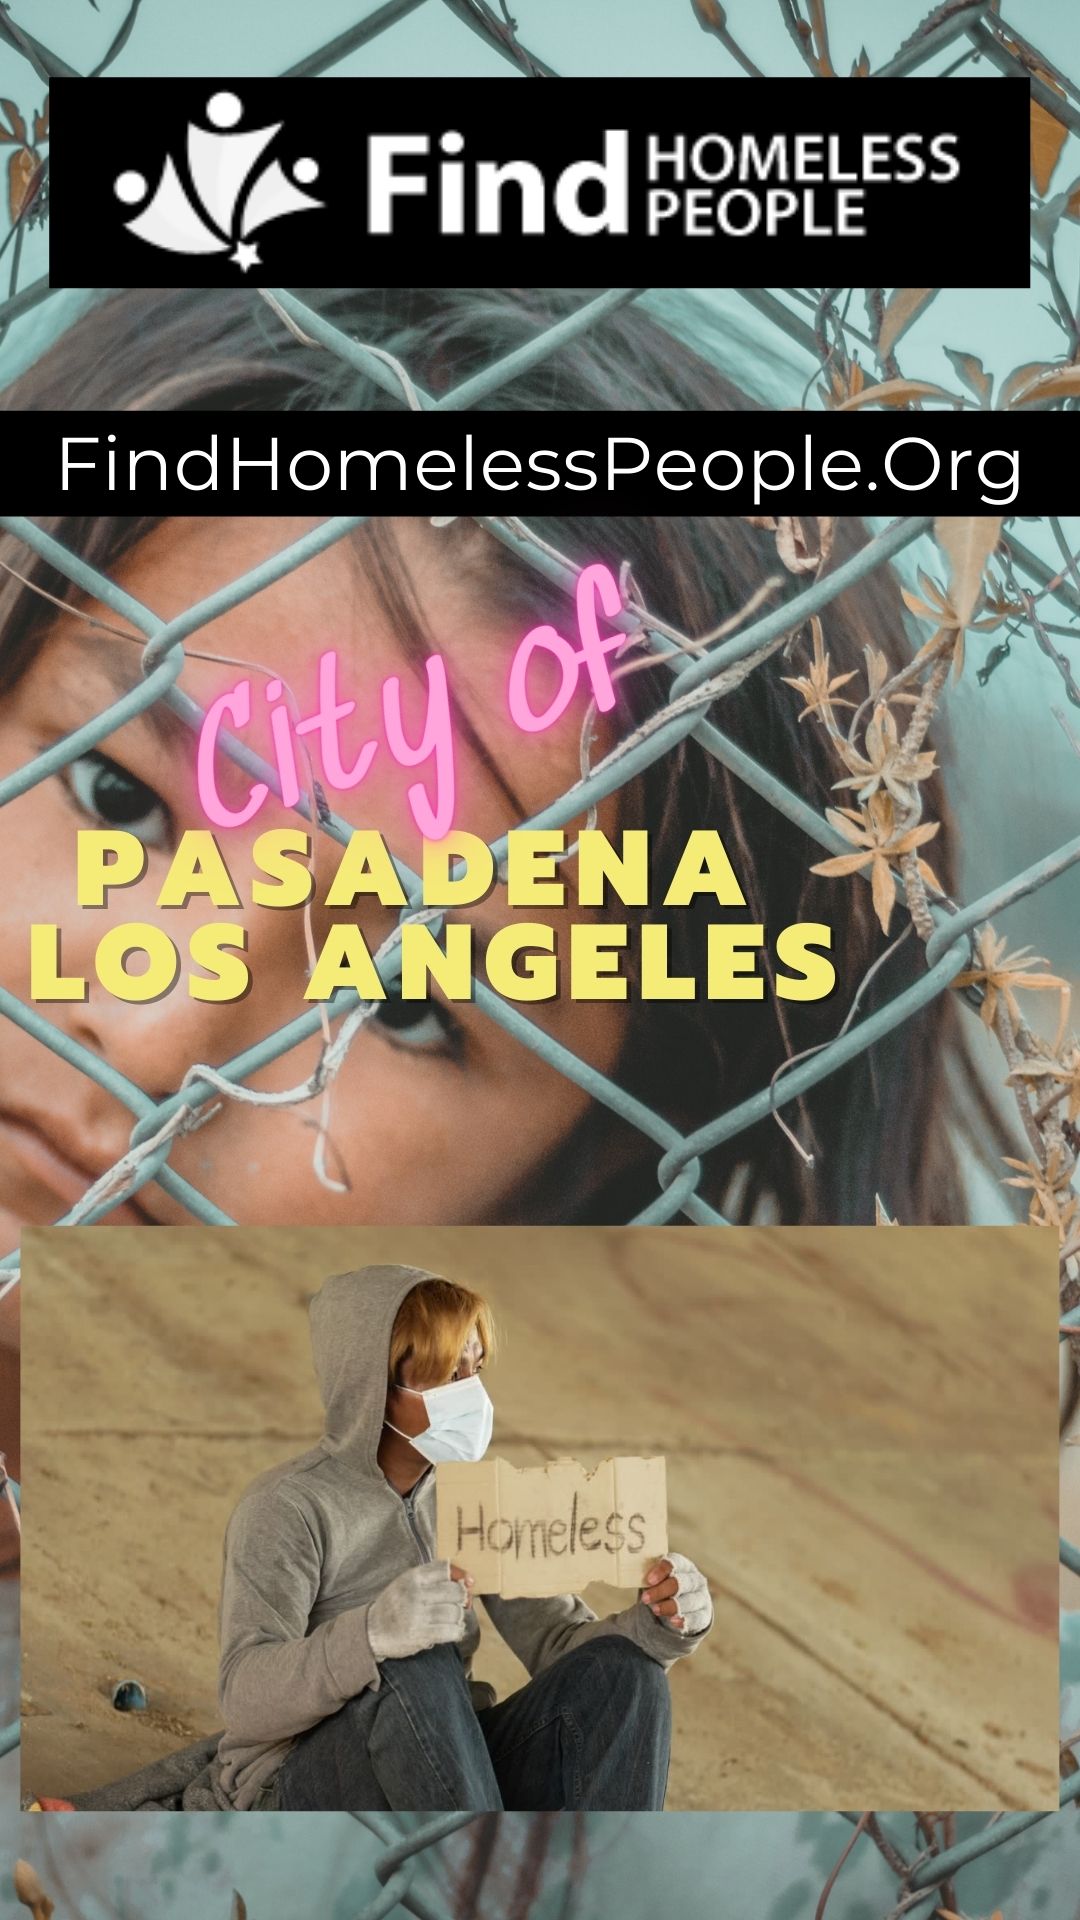 Alhambra Homeless Search